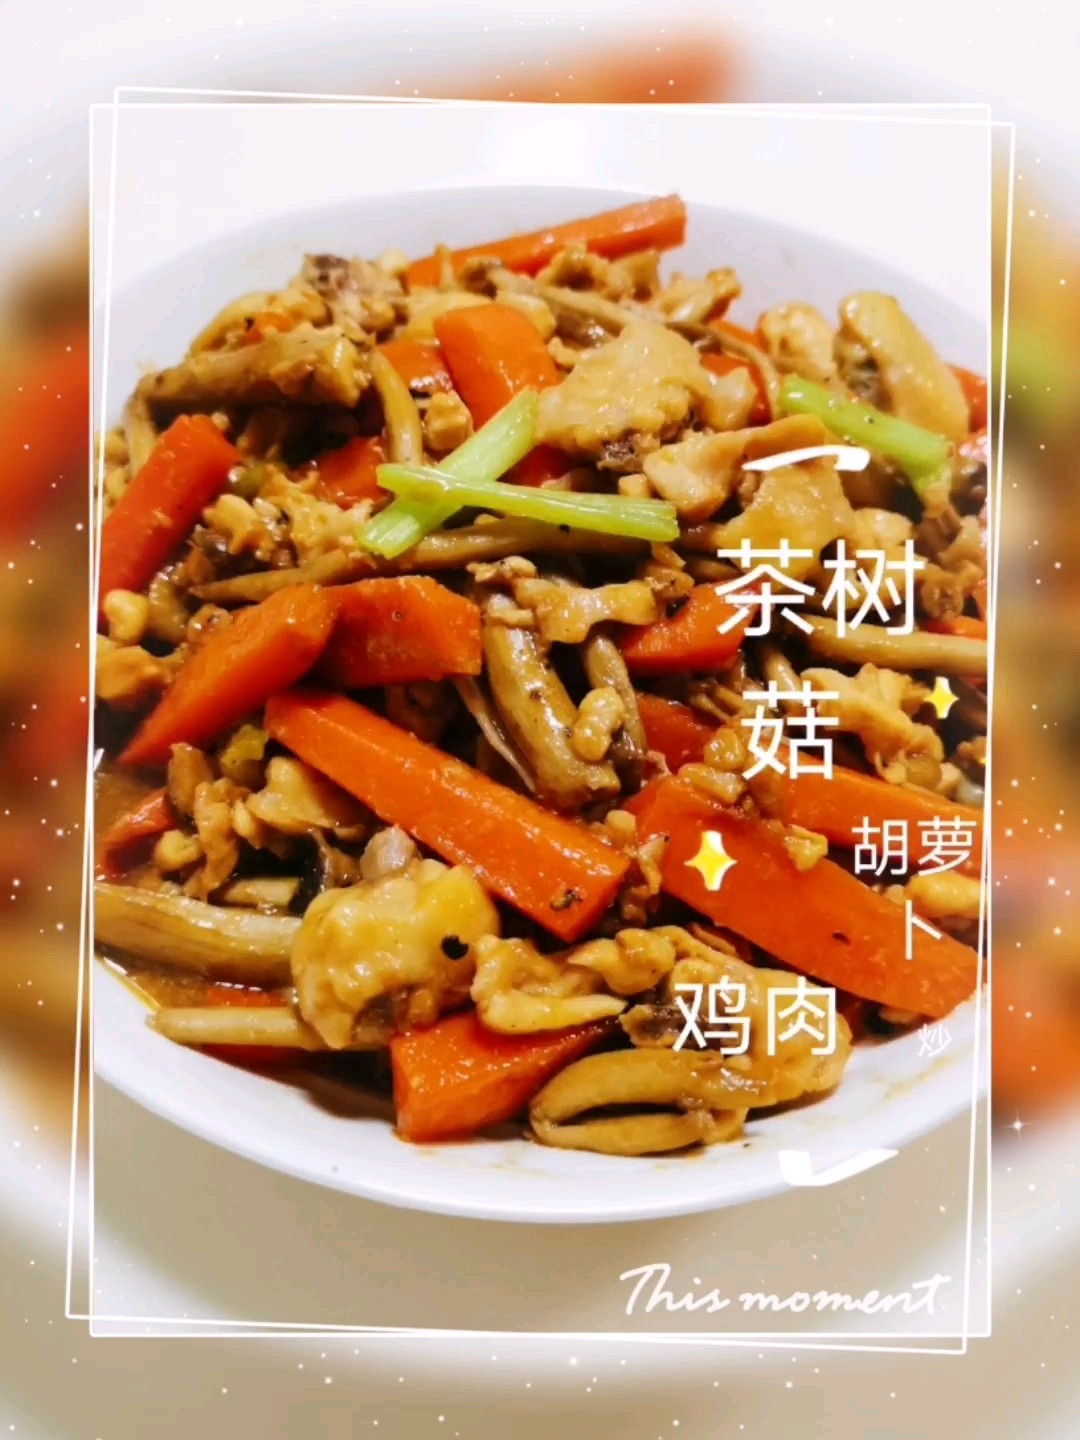 Stir-fried Chicken with Chashu Mushroom and Carrots